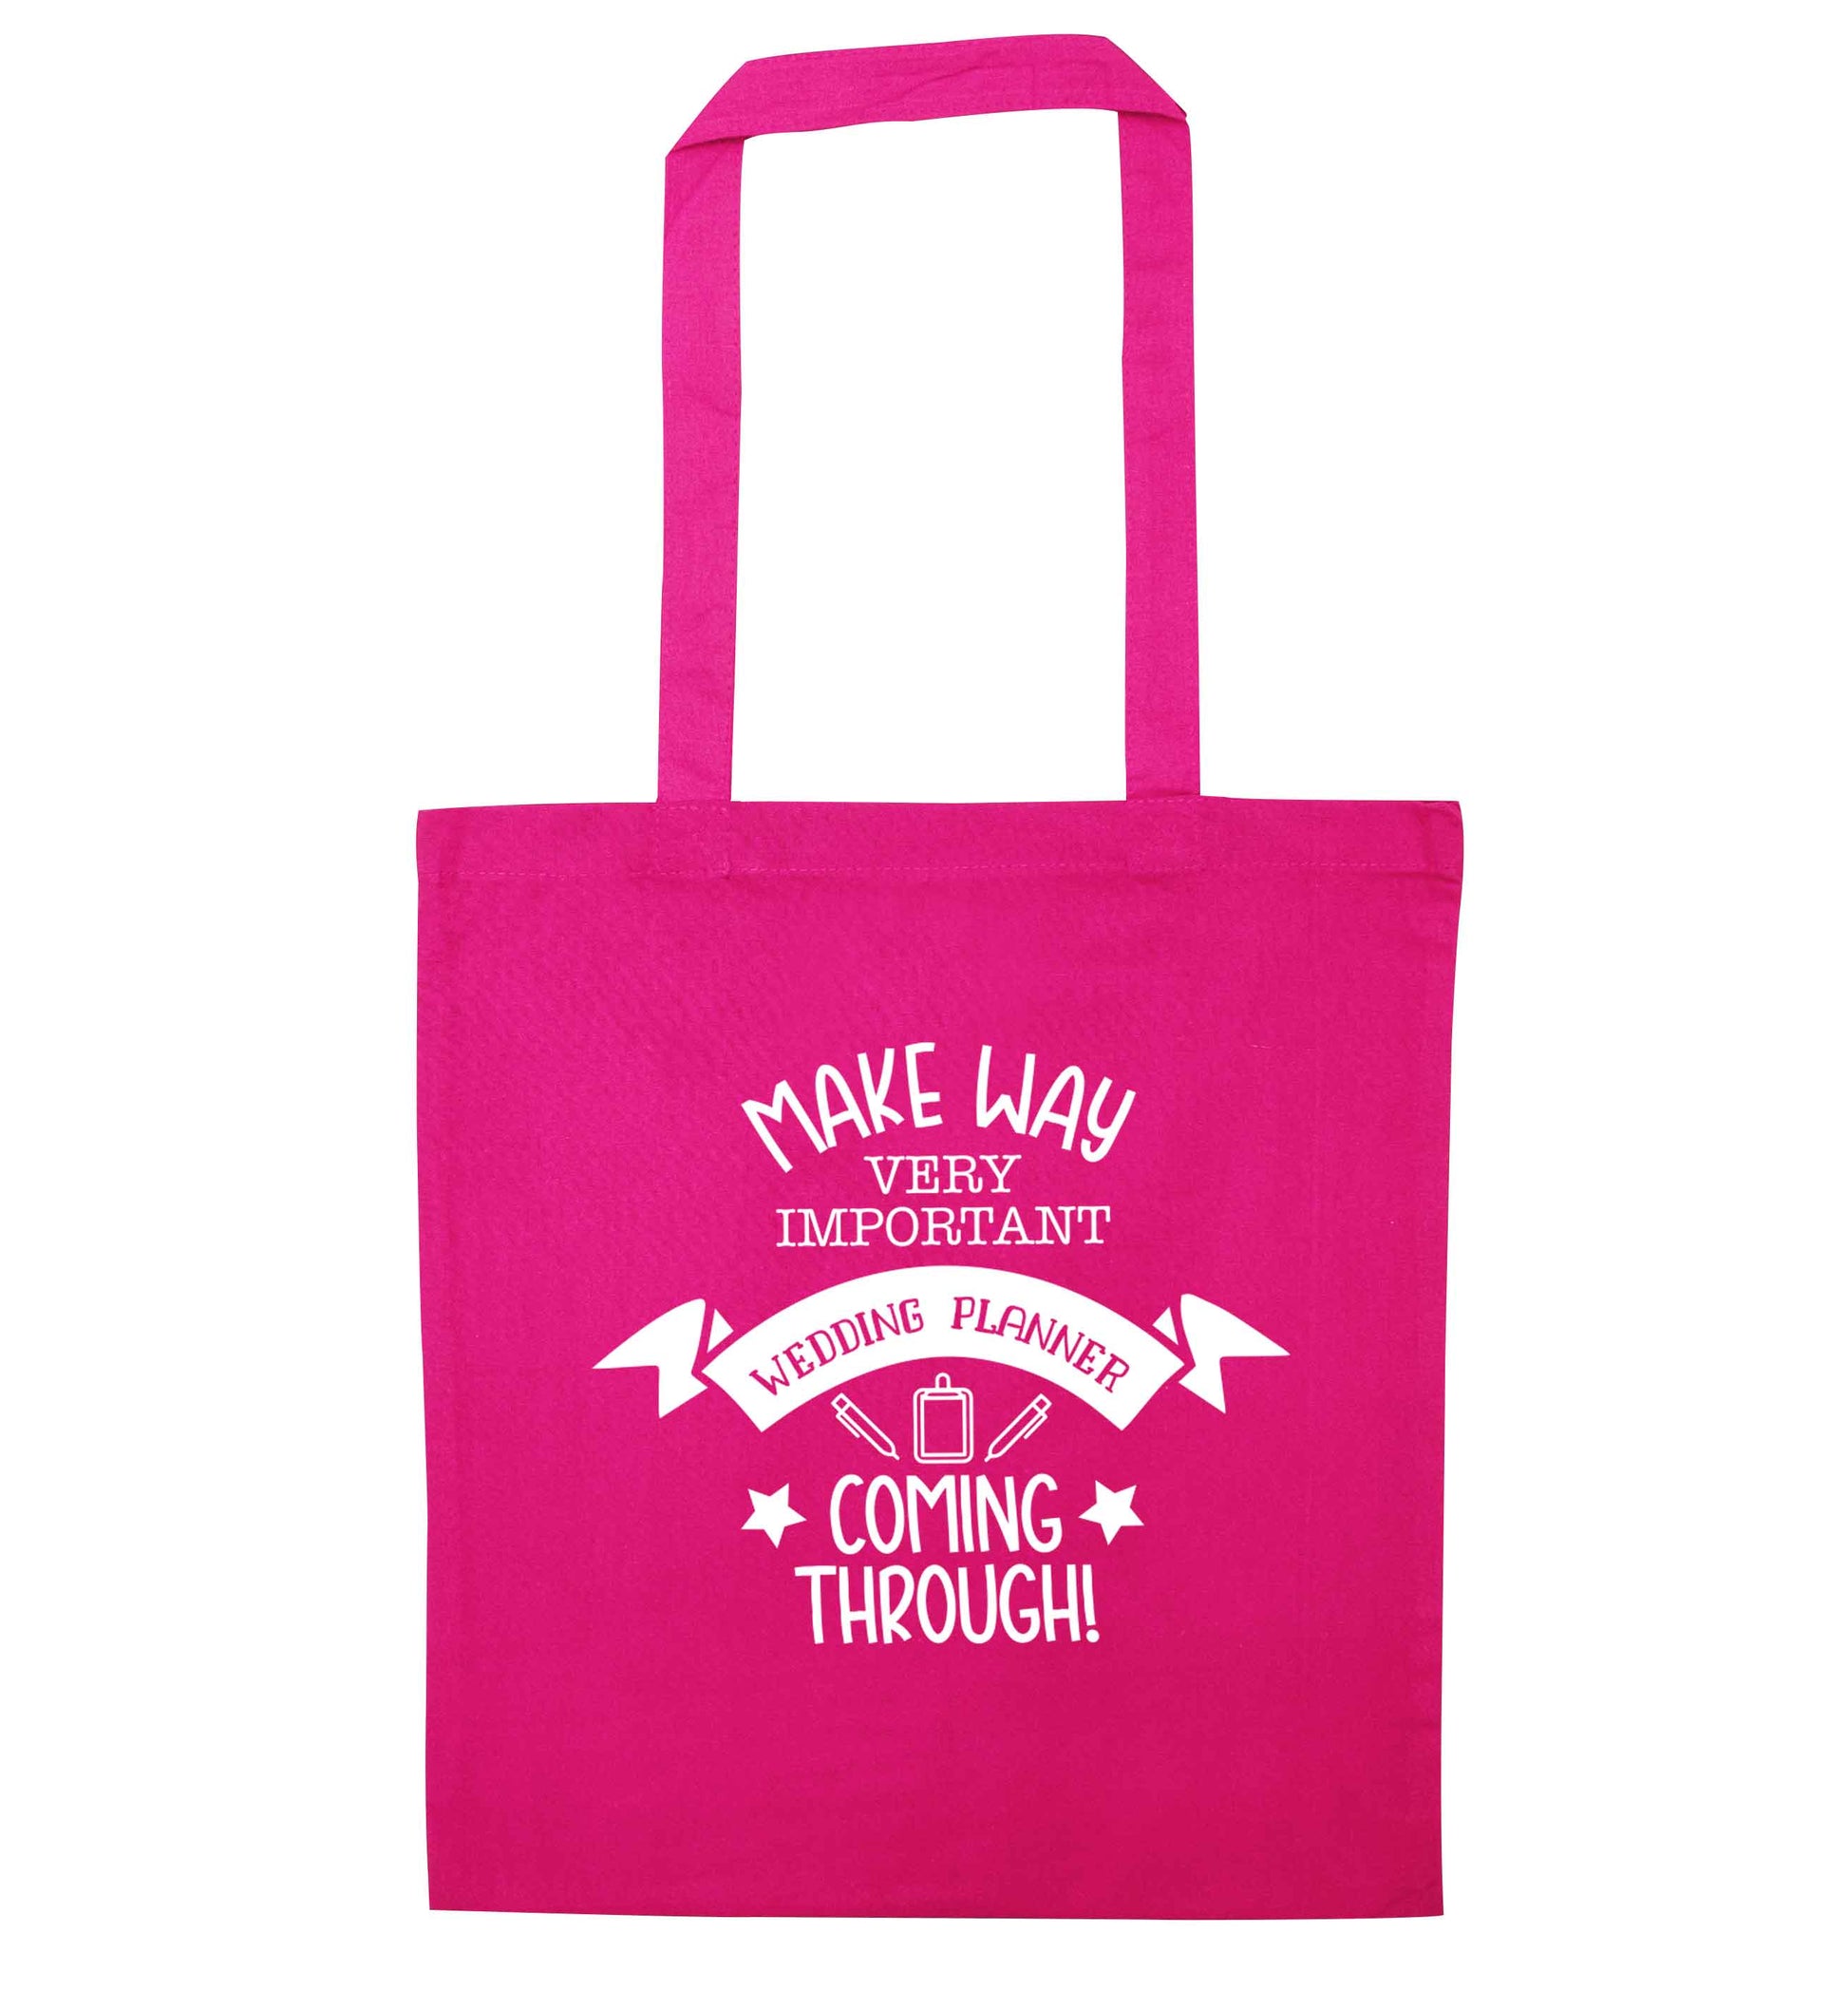 Make way very important wedding planner coming through pink tote bag